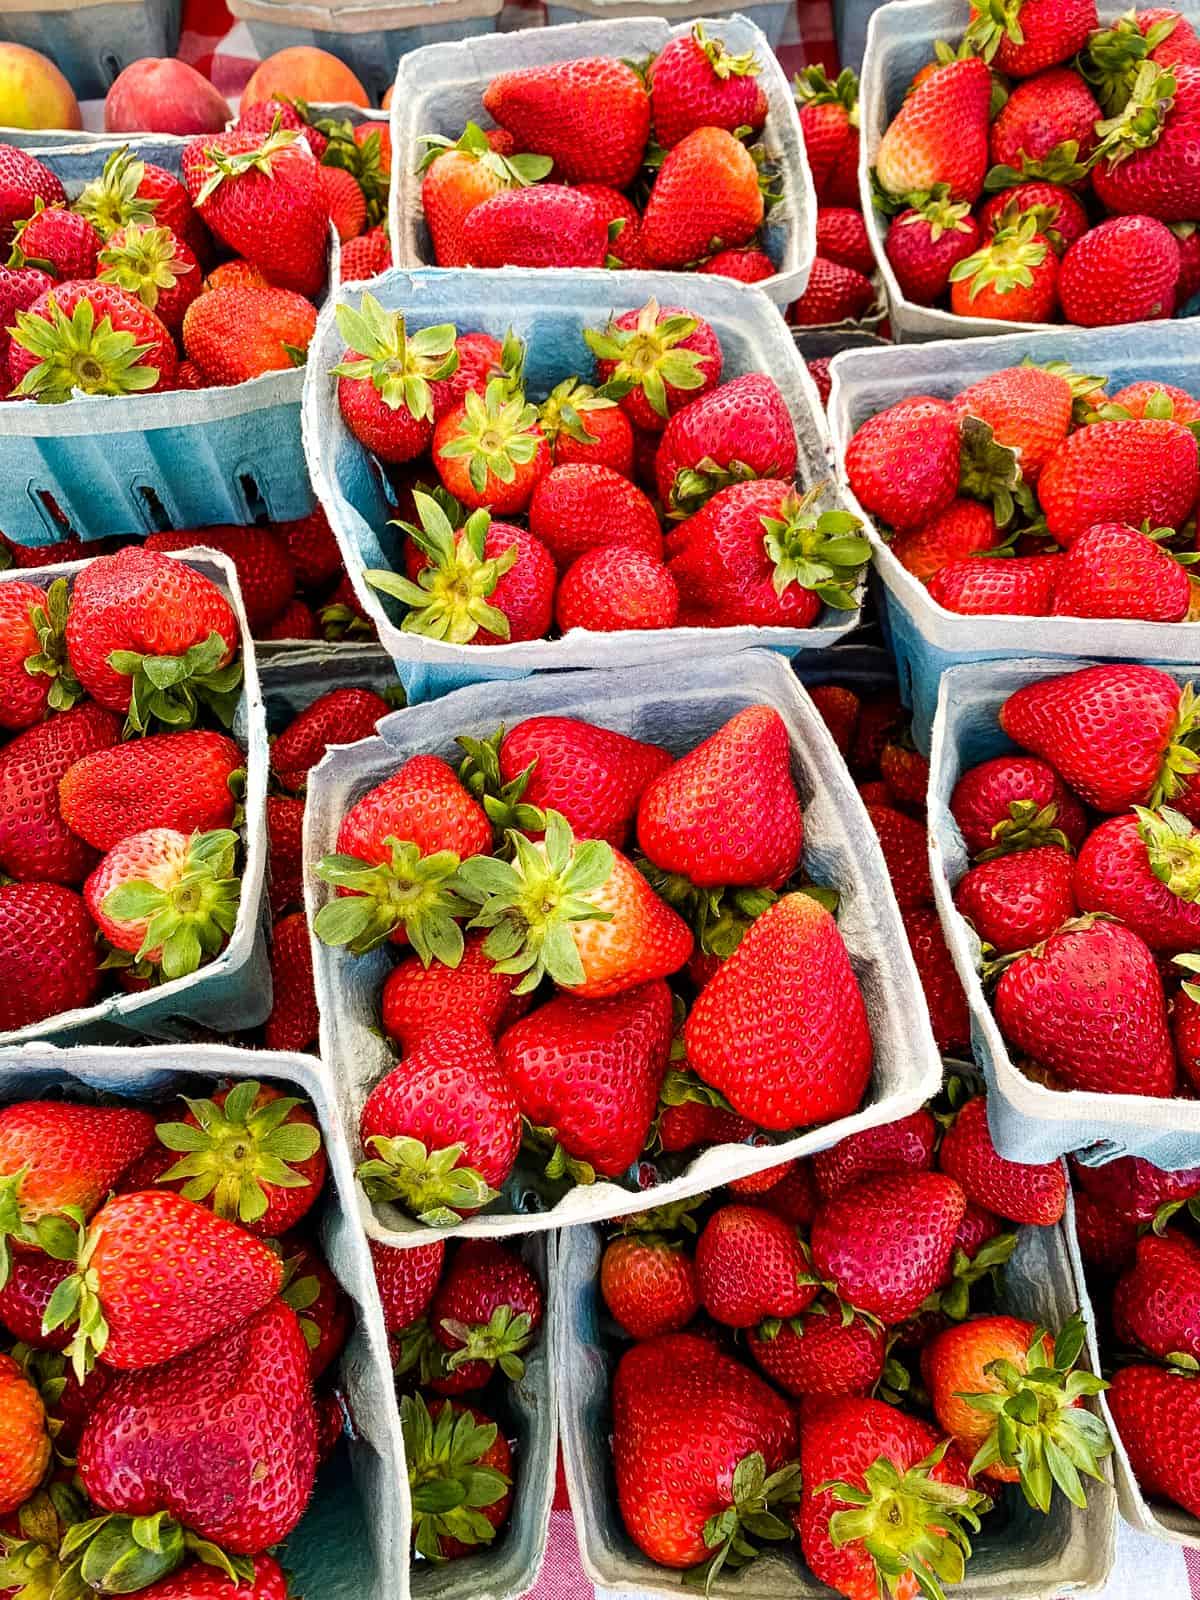 Strawberries for sale at farmers market.